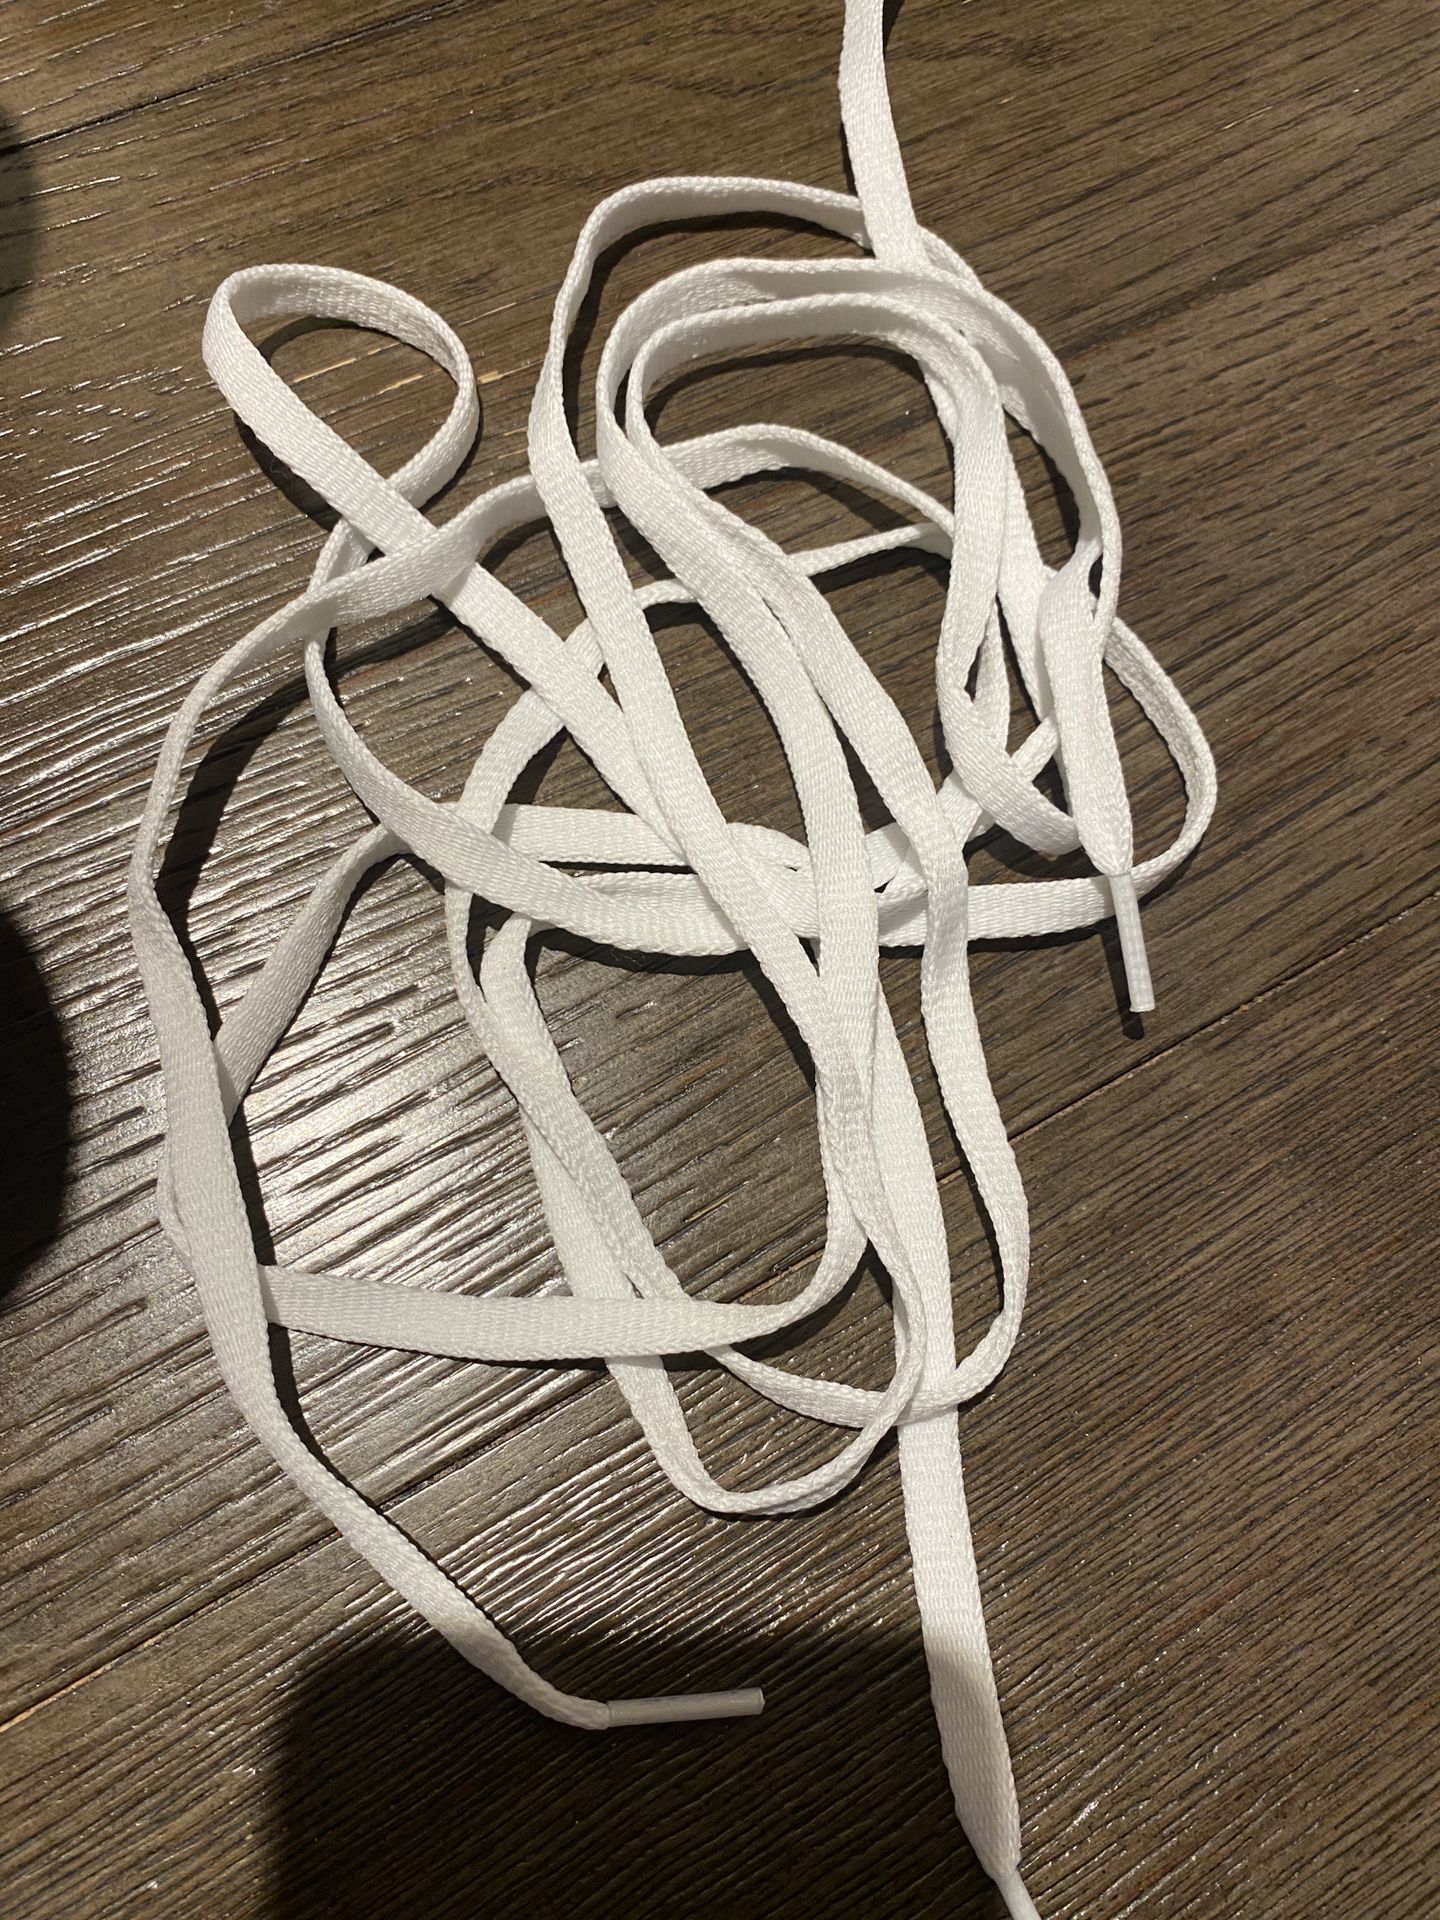 Large White Rubber Bands